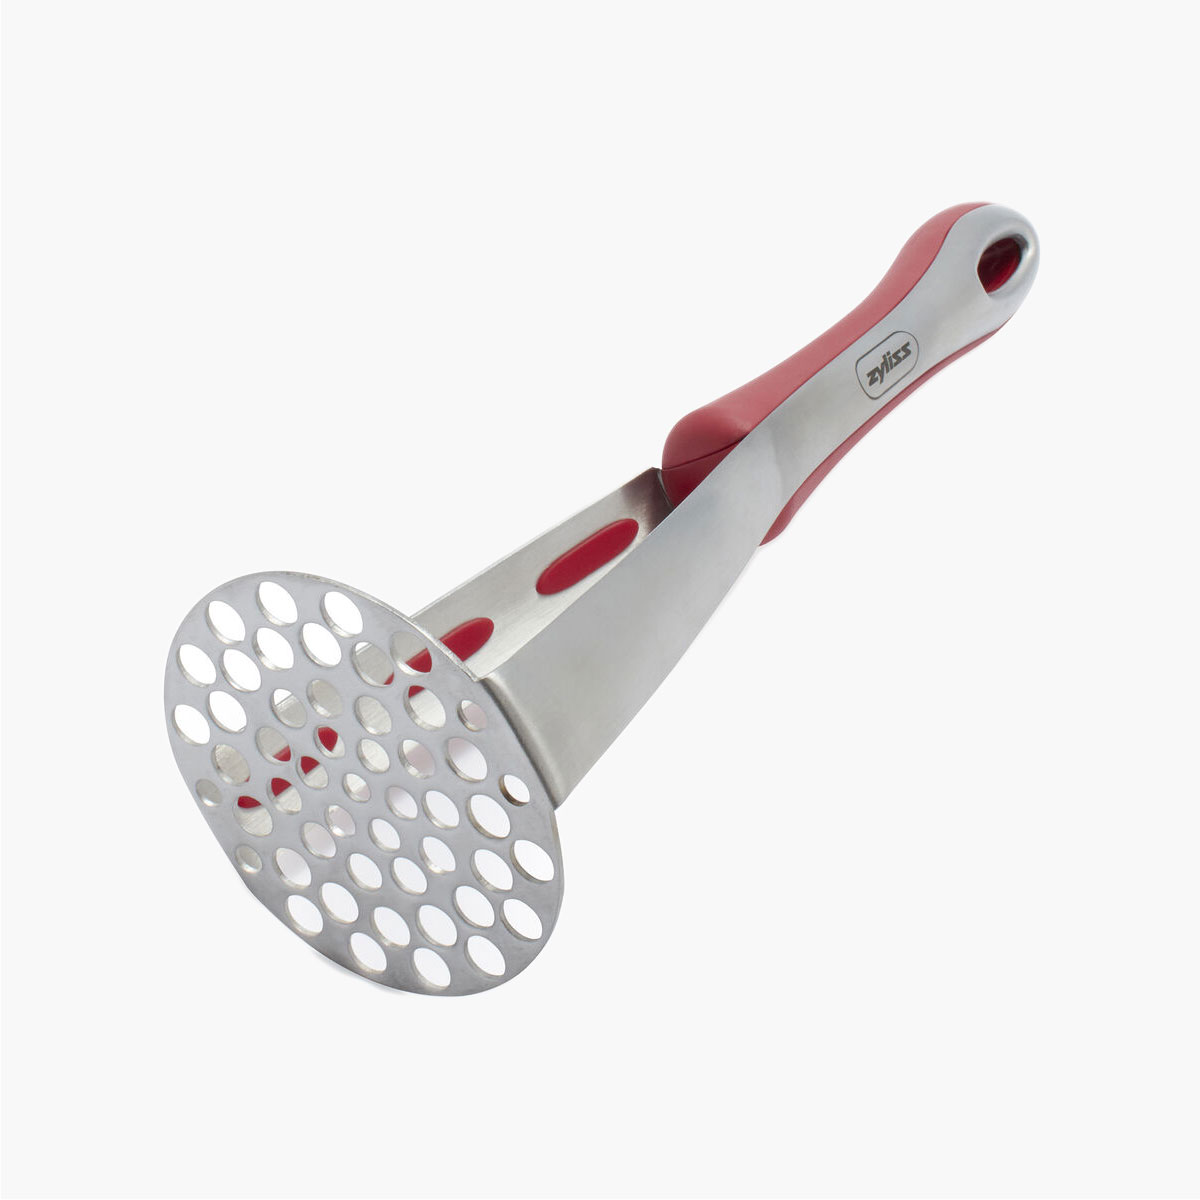 Zyliss Stainless Steel Potato Masher Side View